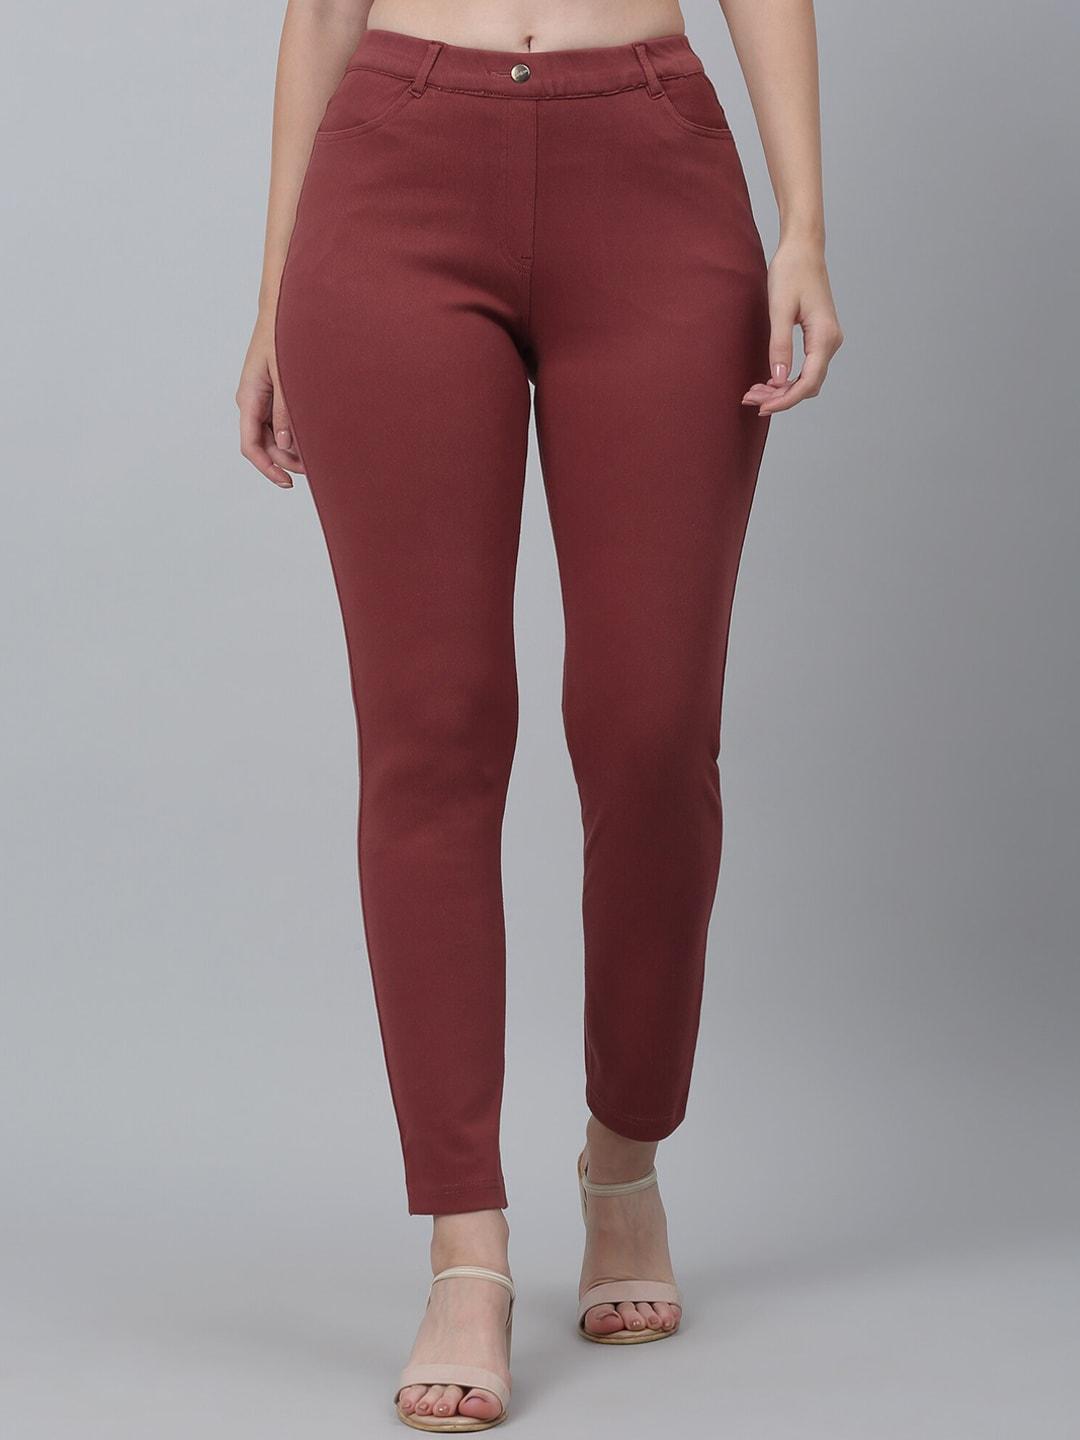 Cantabil Cotton Mid Rise Jeggings